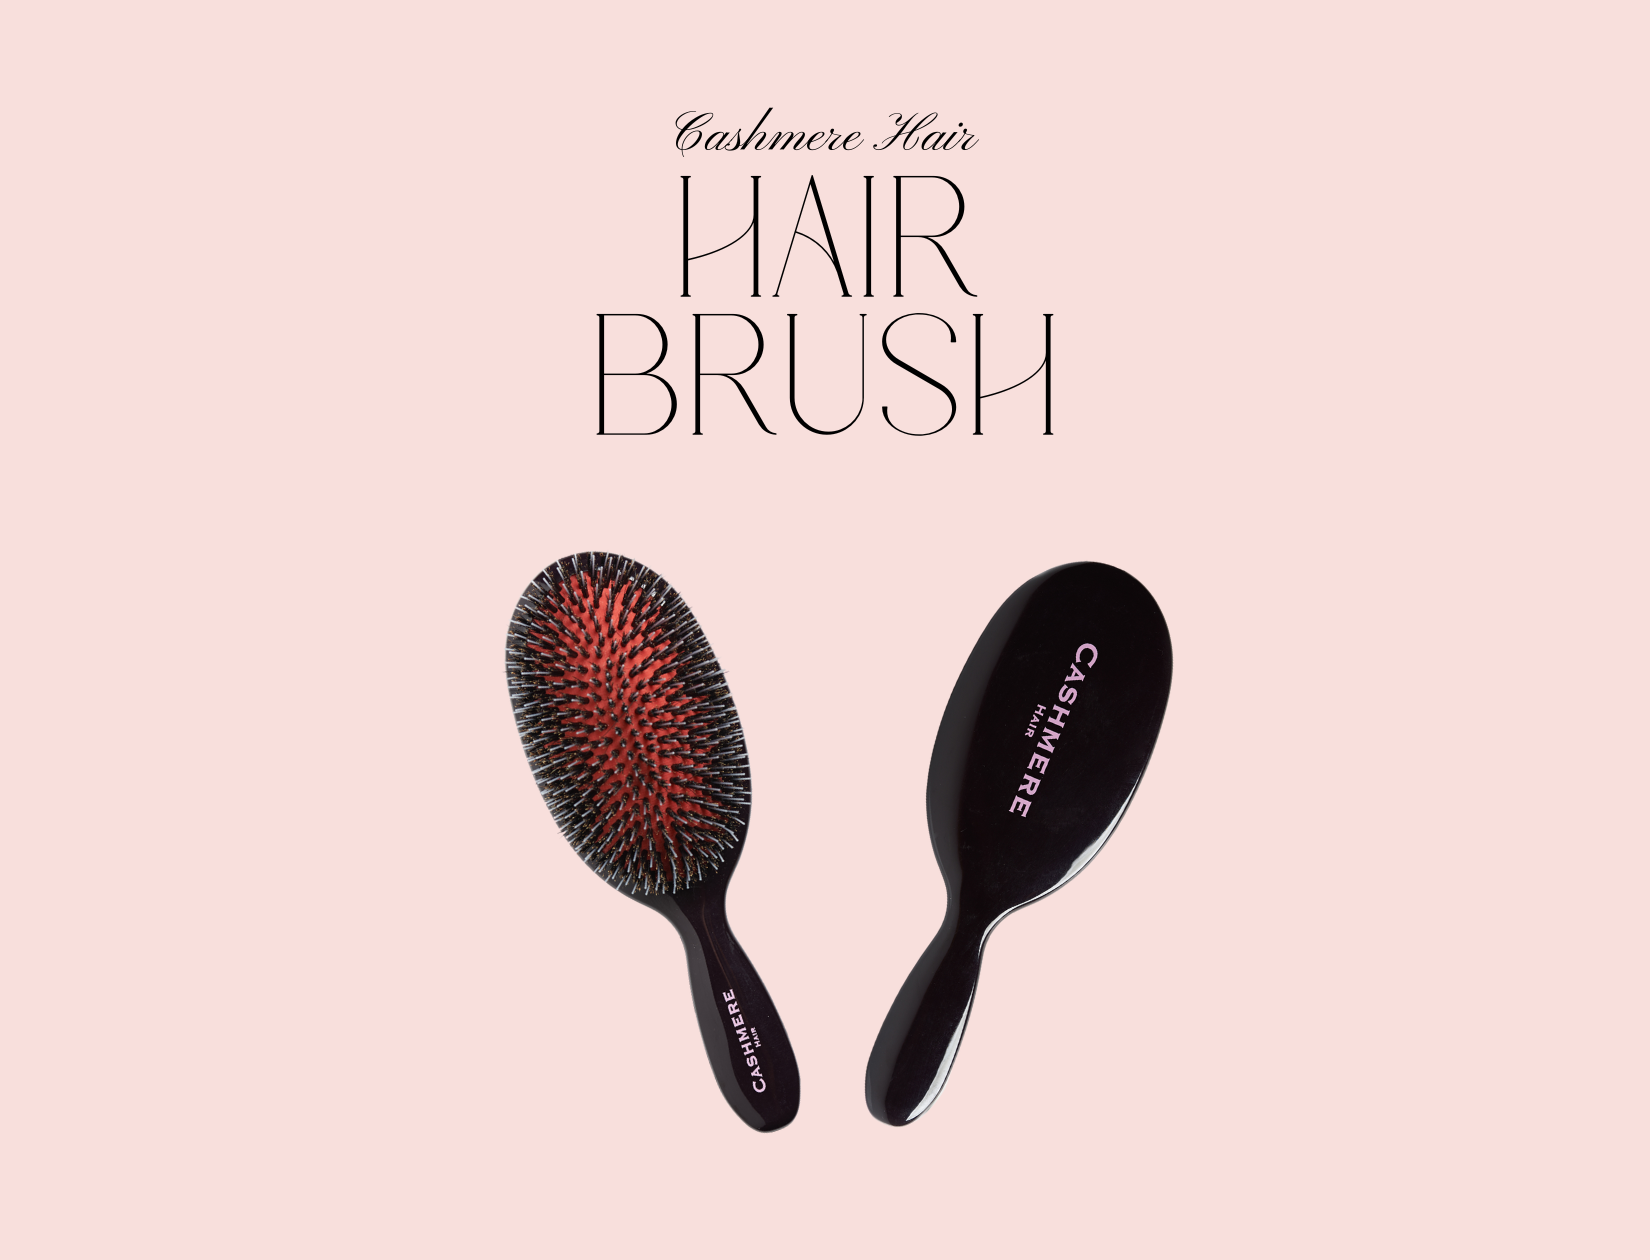 cashmere hair hair brush front and back